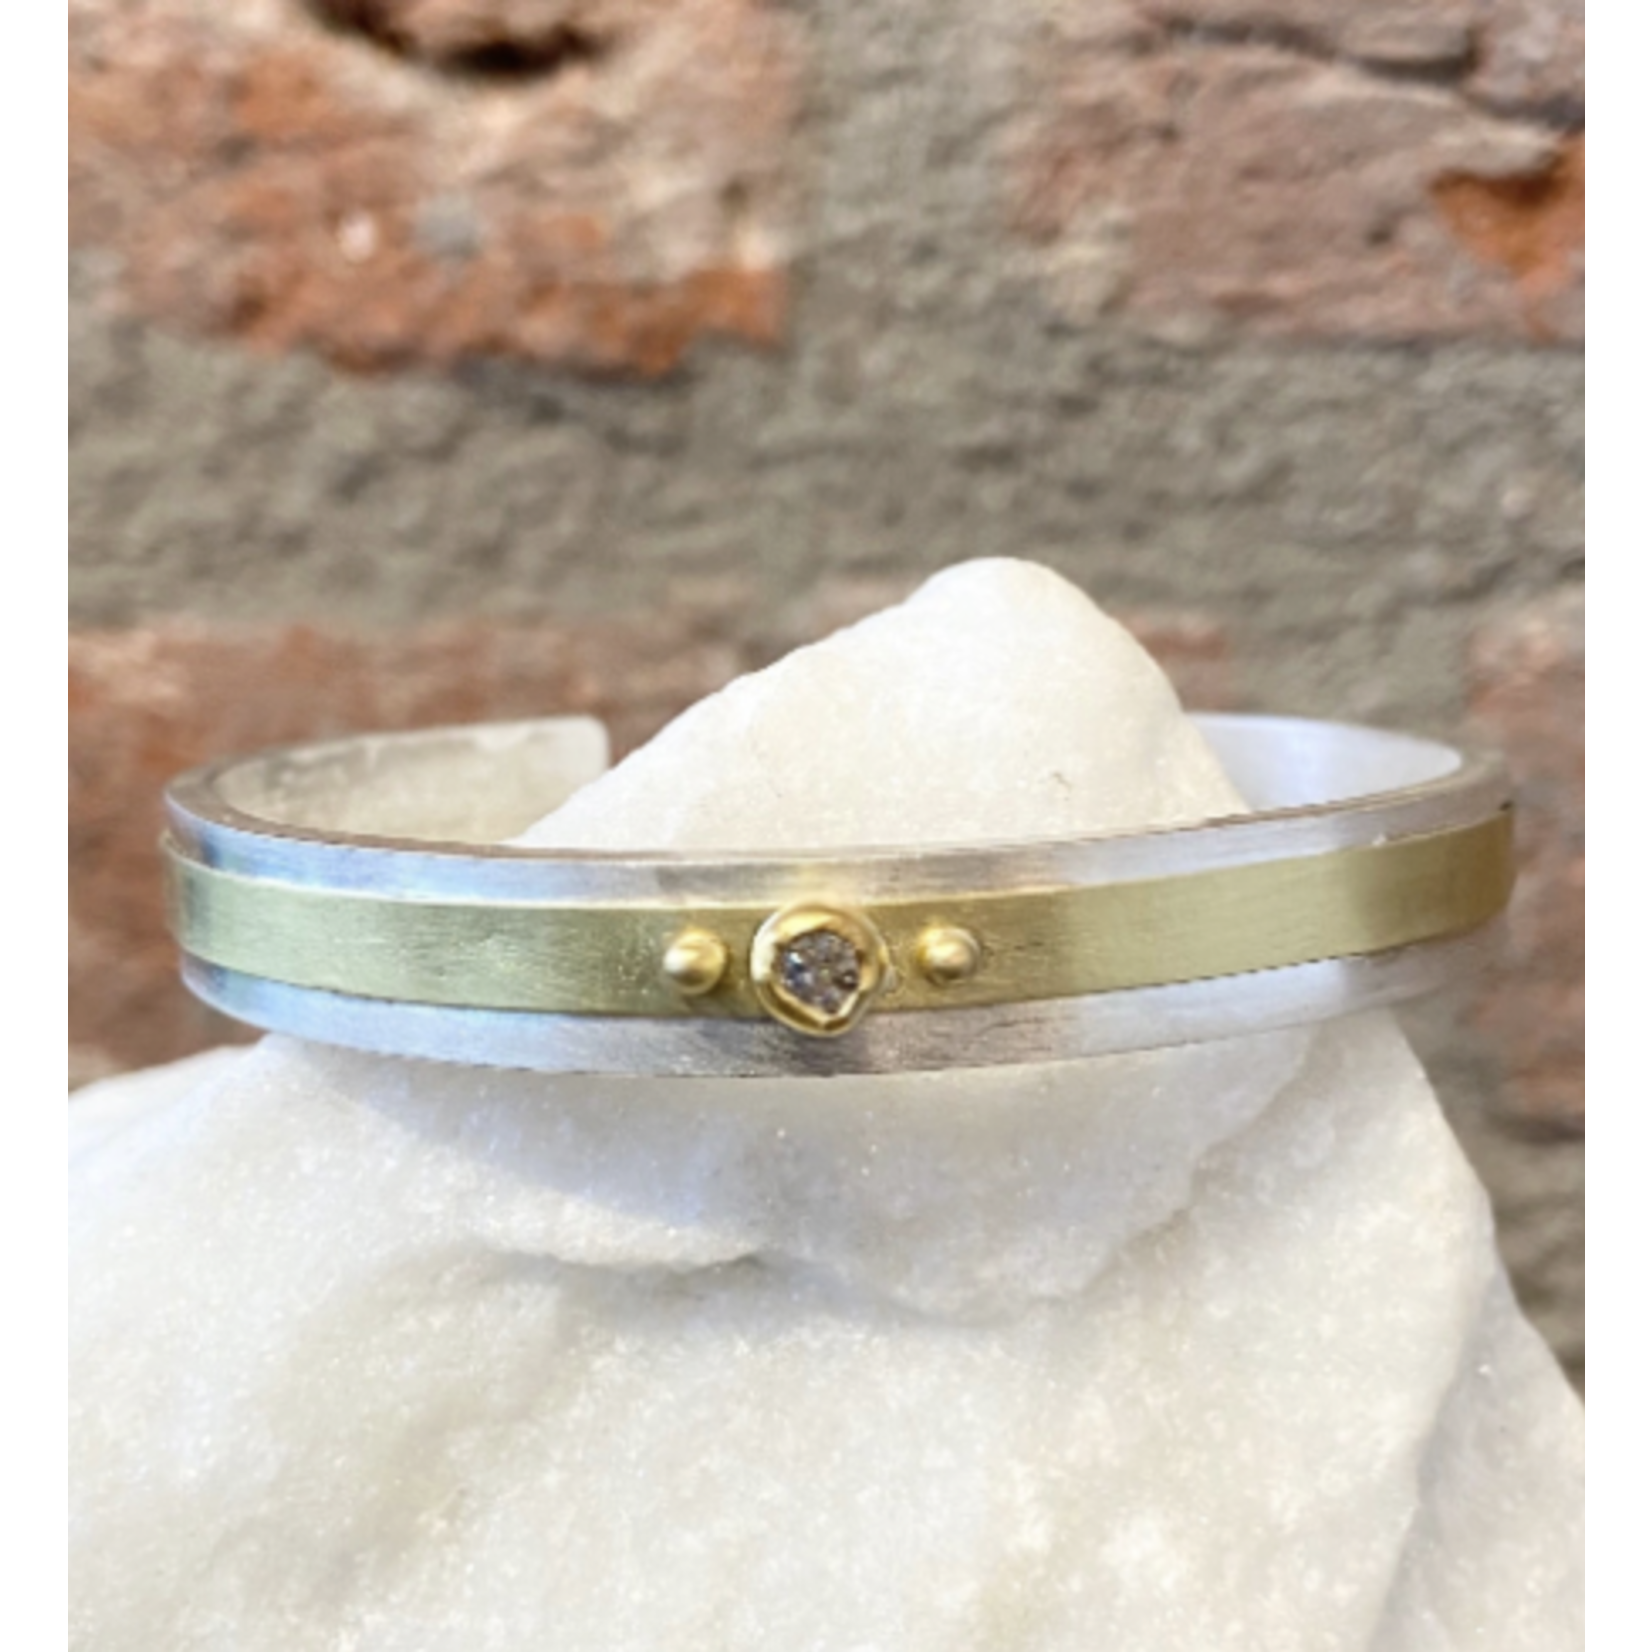 Silver and Gold "Ribbon" Cuff Bracelet with Moissanite Center Stone